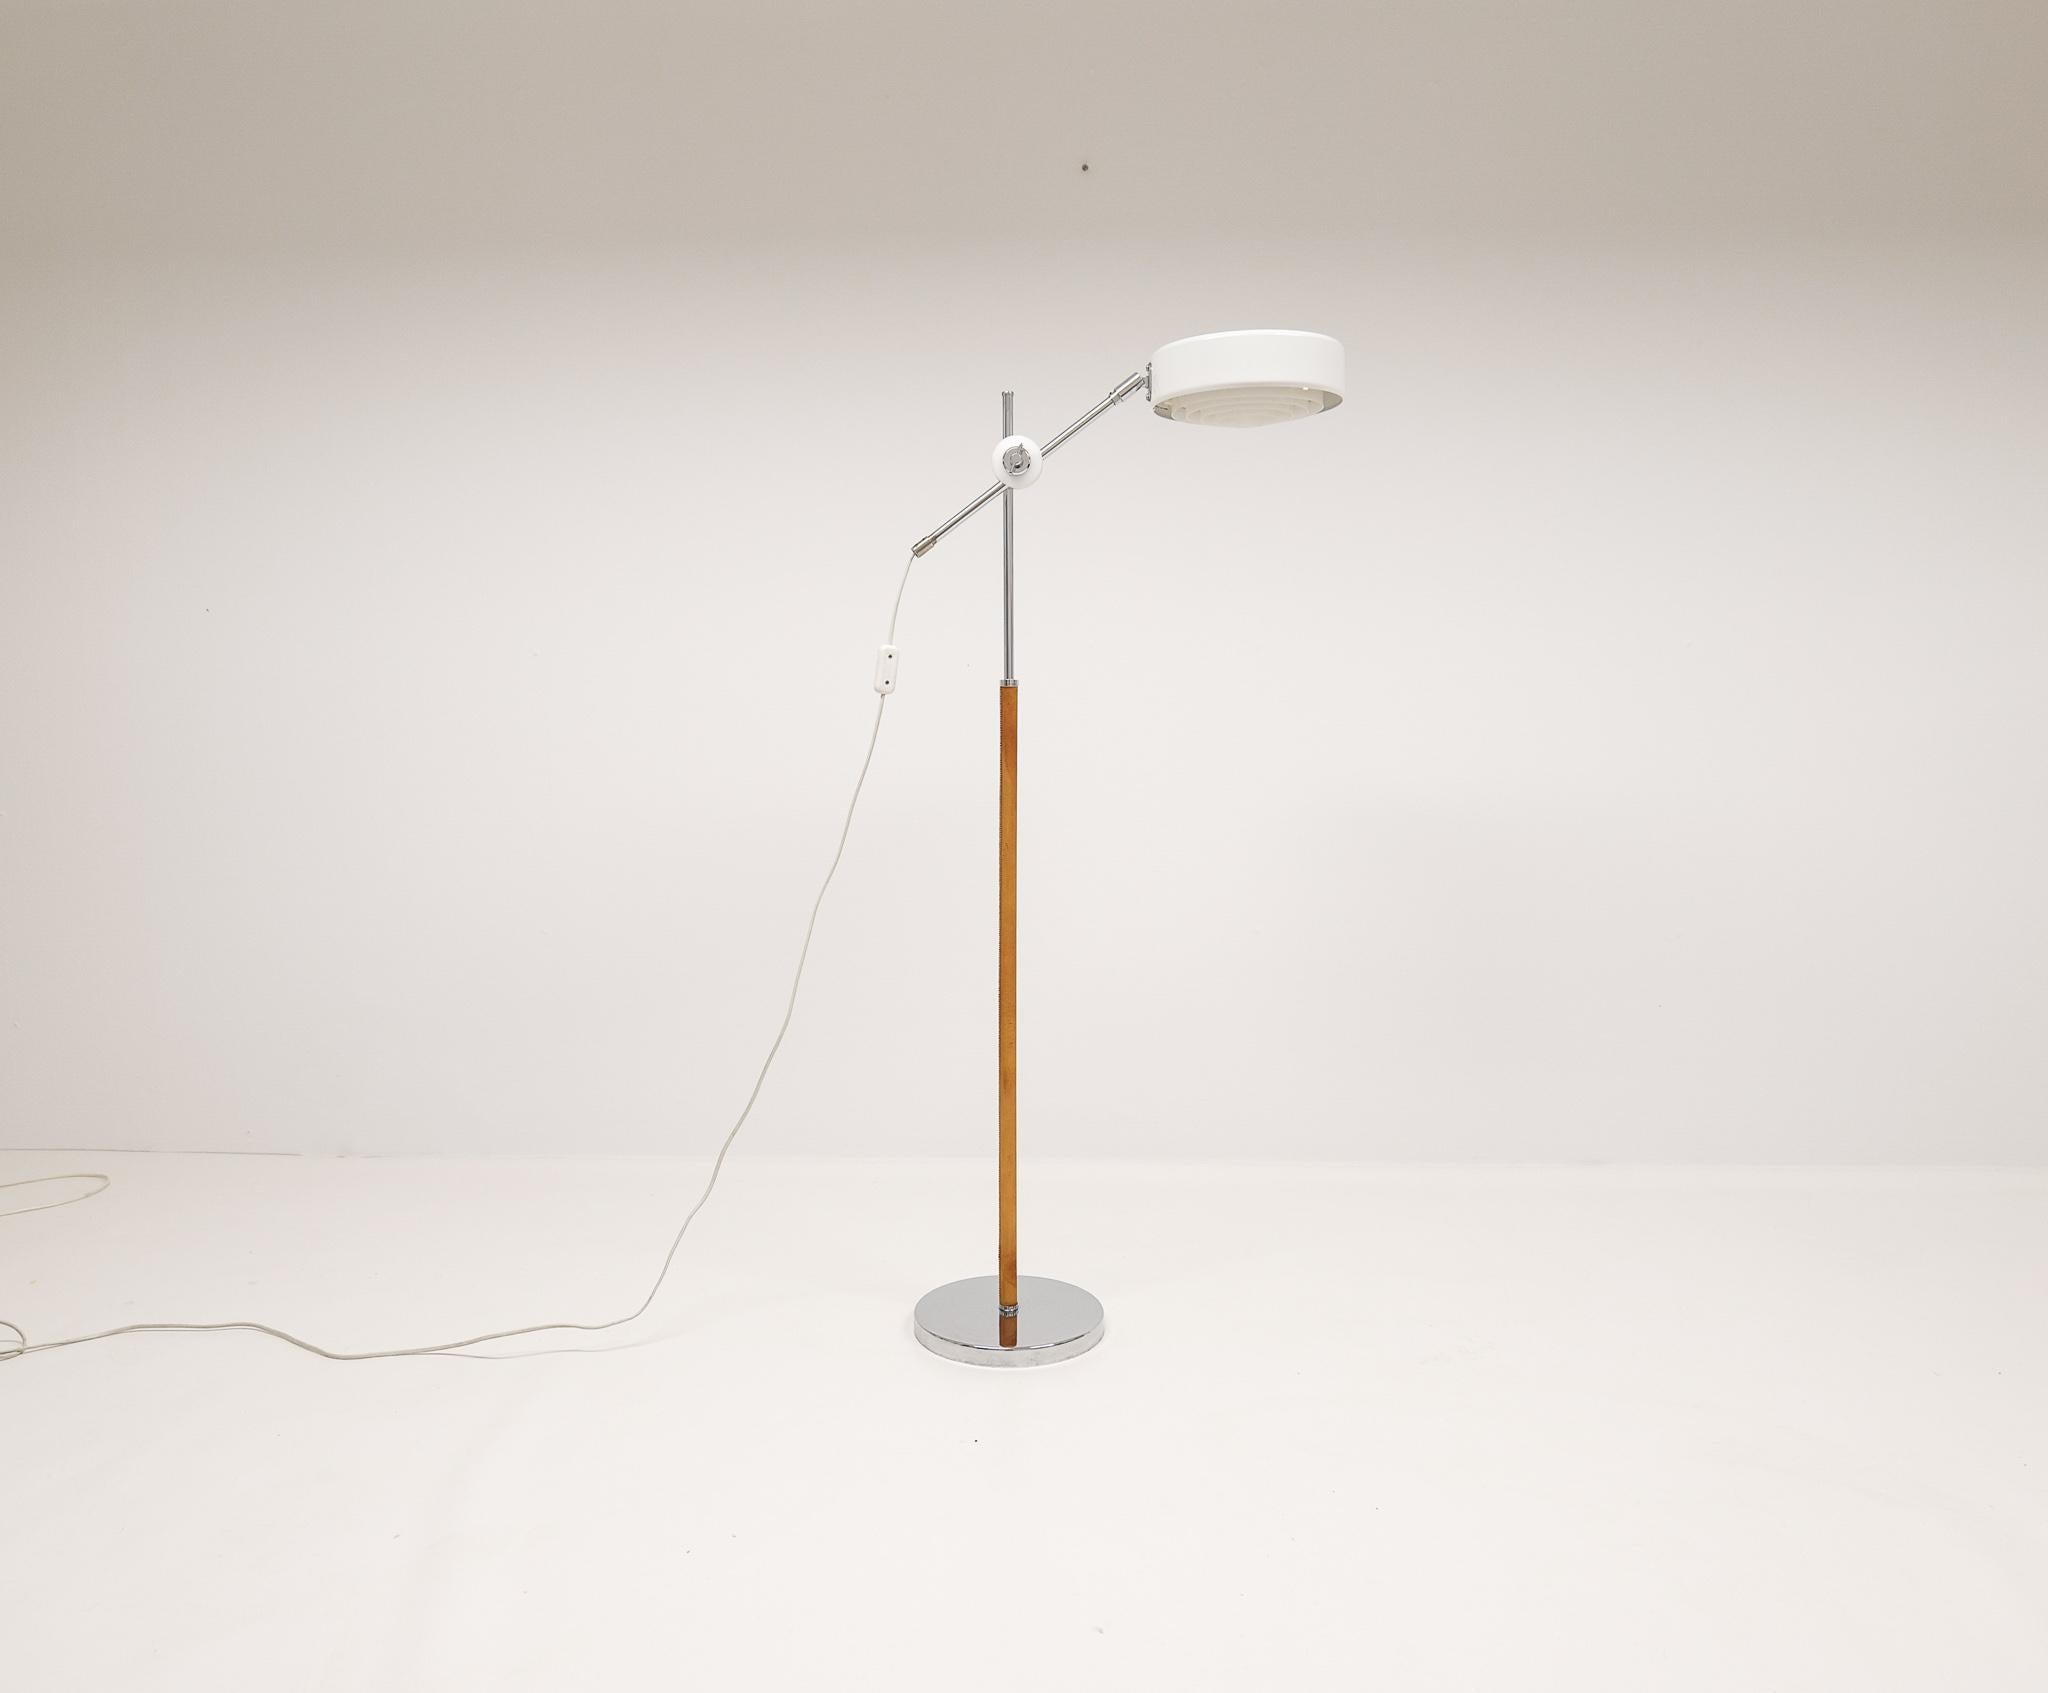 The Simris floor lamp is designed by Anders Pehrson who took over the business of Atelje´ Lyktan in 1964. The lamp has a chrome foot with a leather and chrome on the other parts. The lamp is adjustable in height and the shade can be turned 360